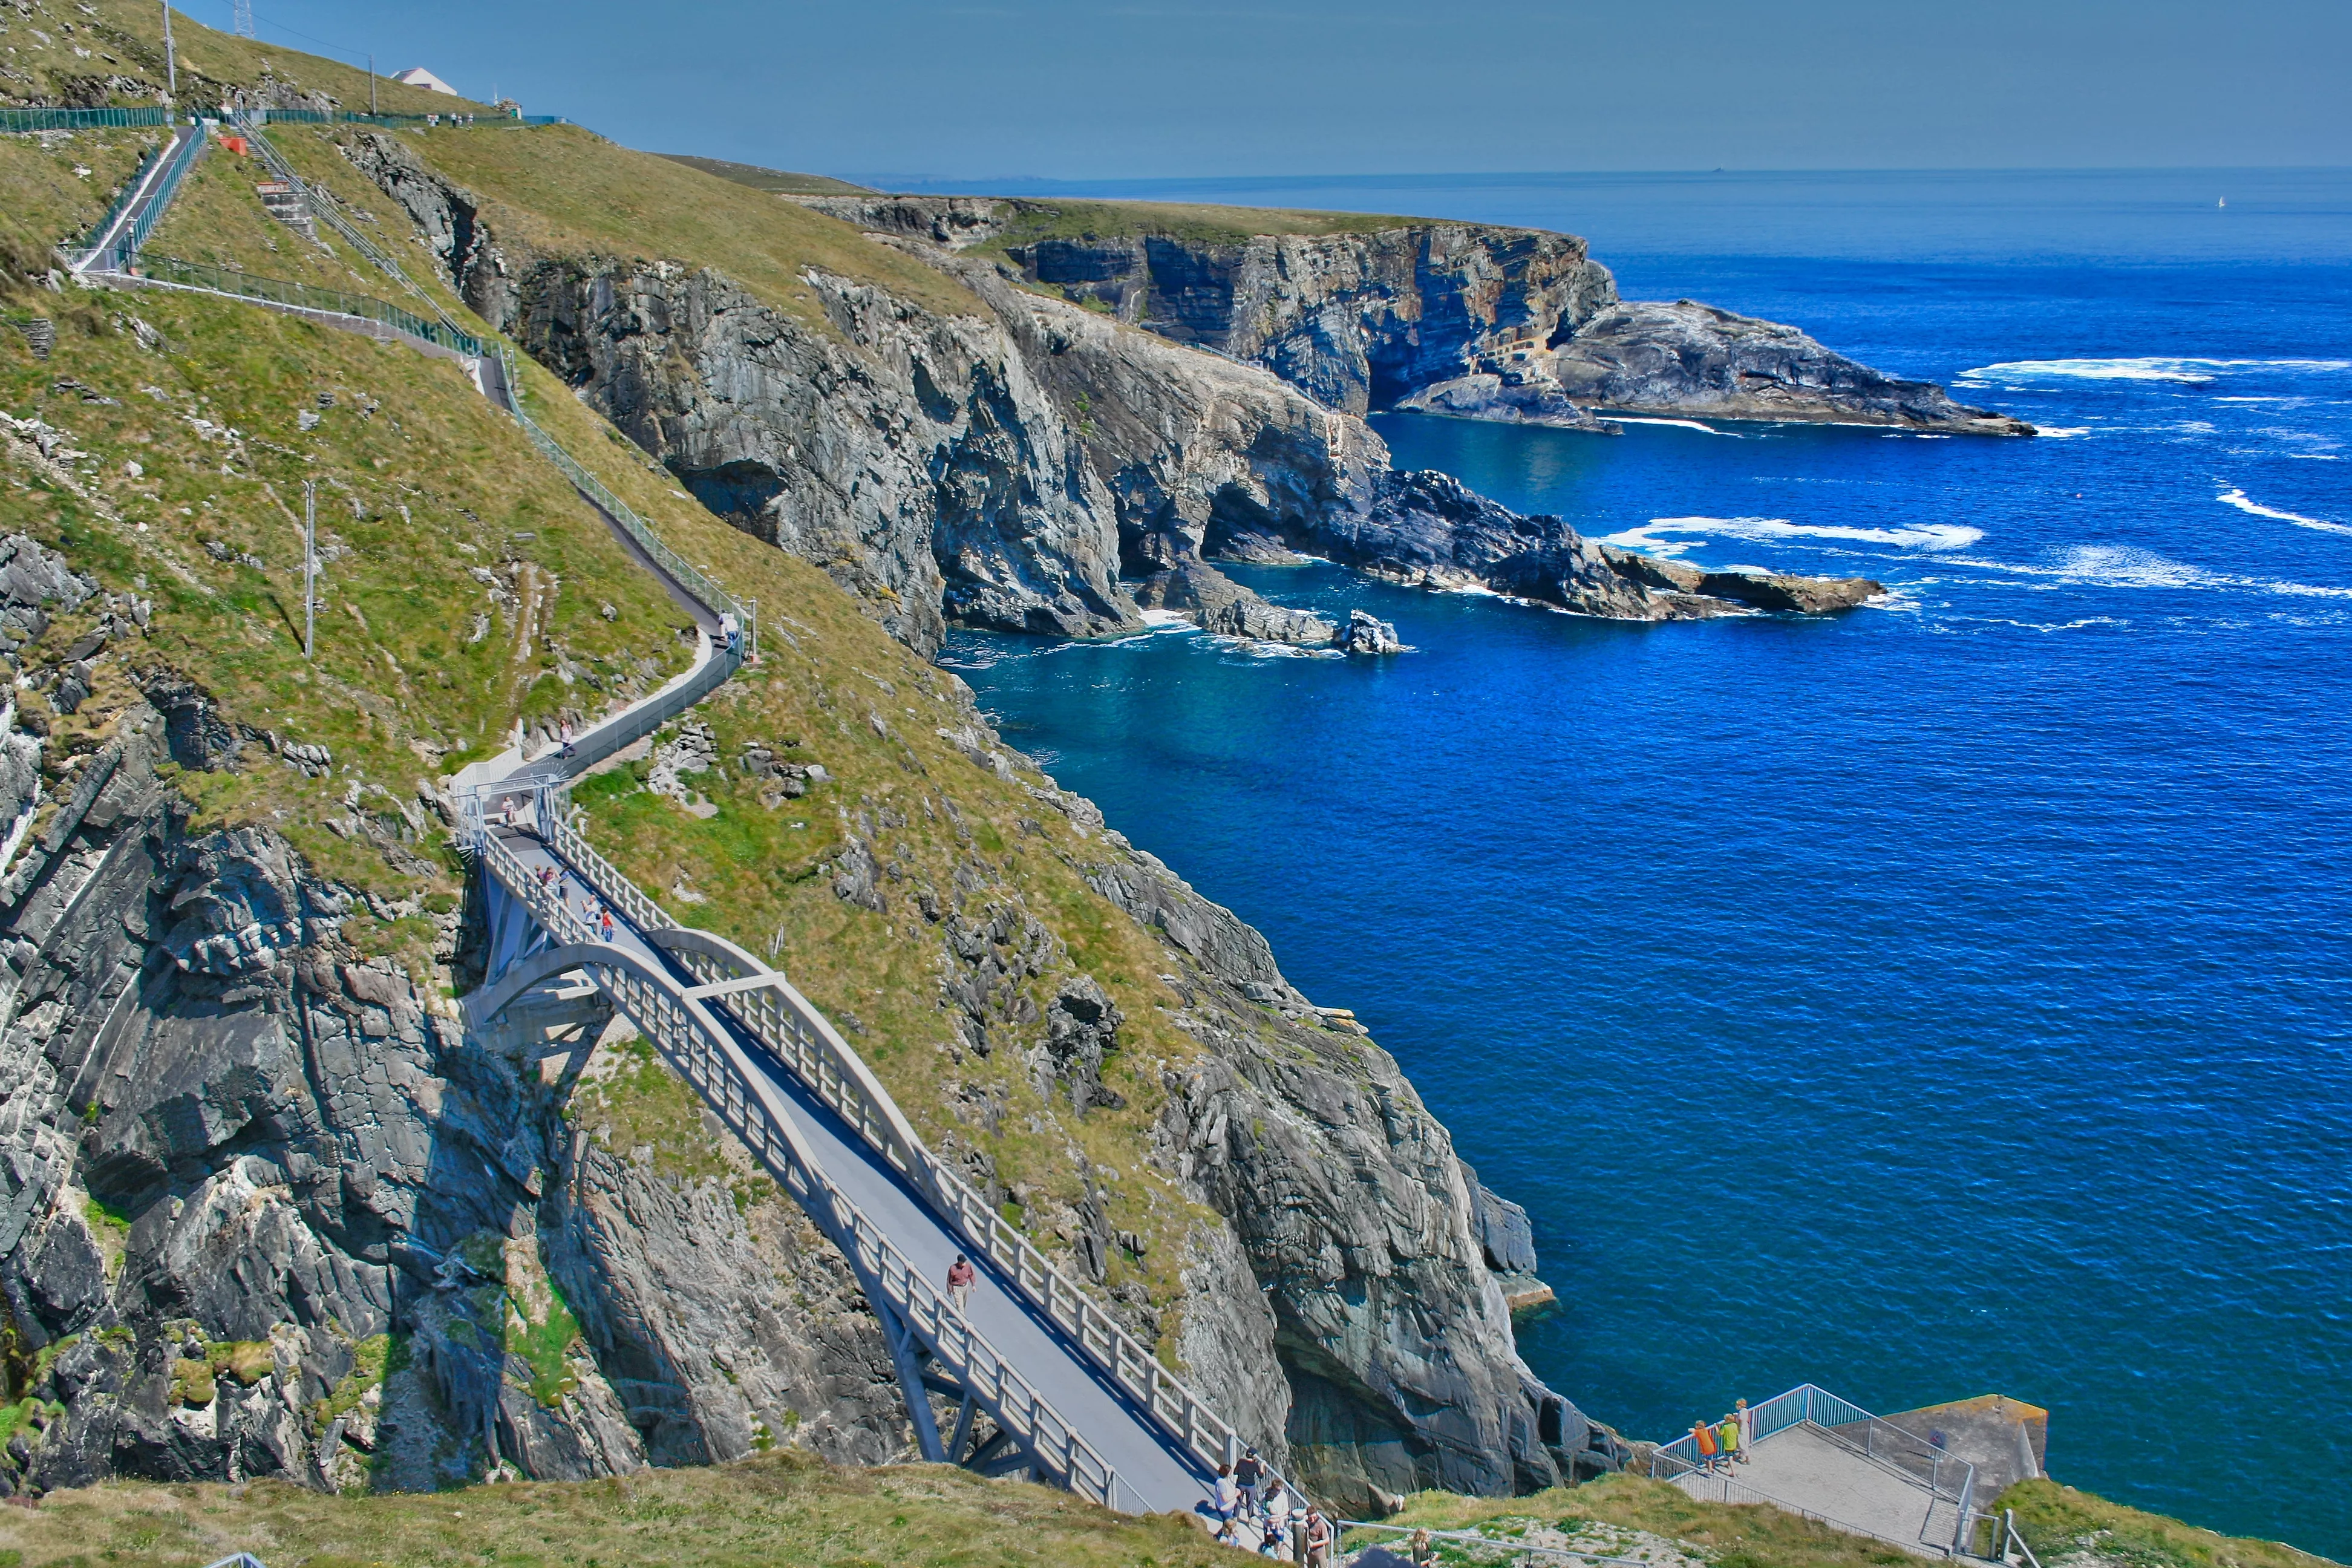 A stunning footbridge connects Mizen Head to a nearby island above deep blue waters